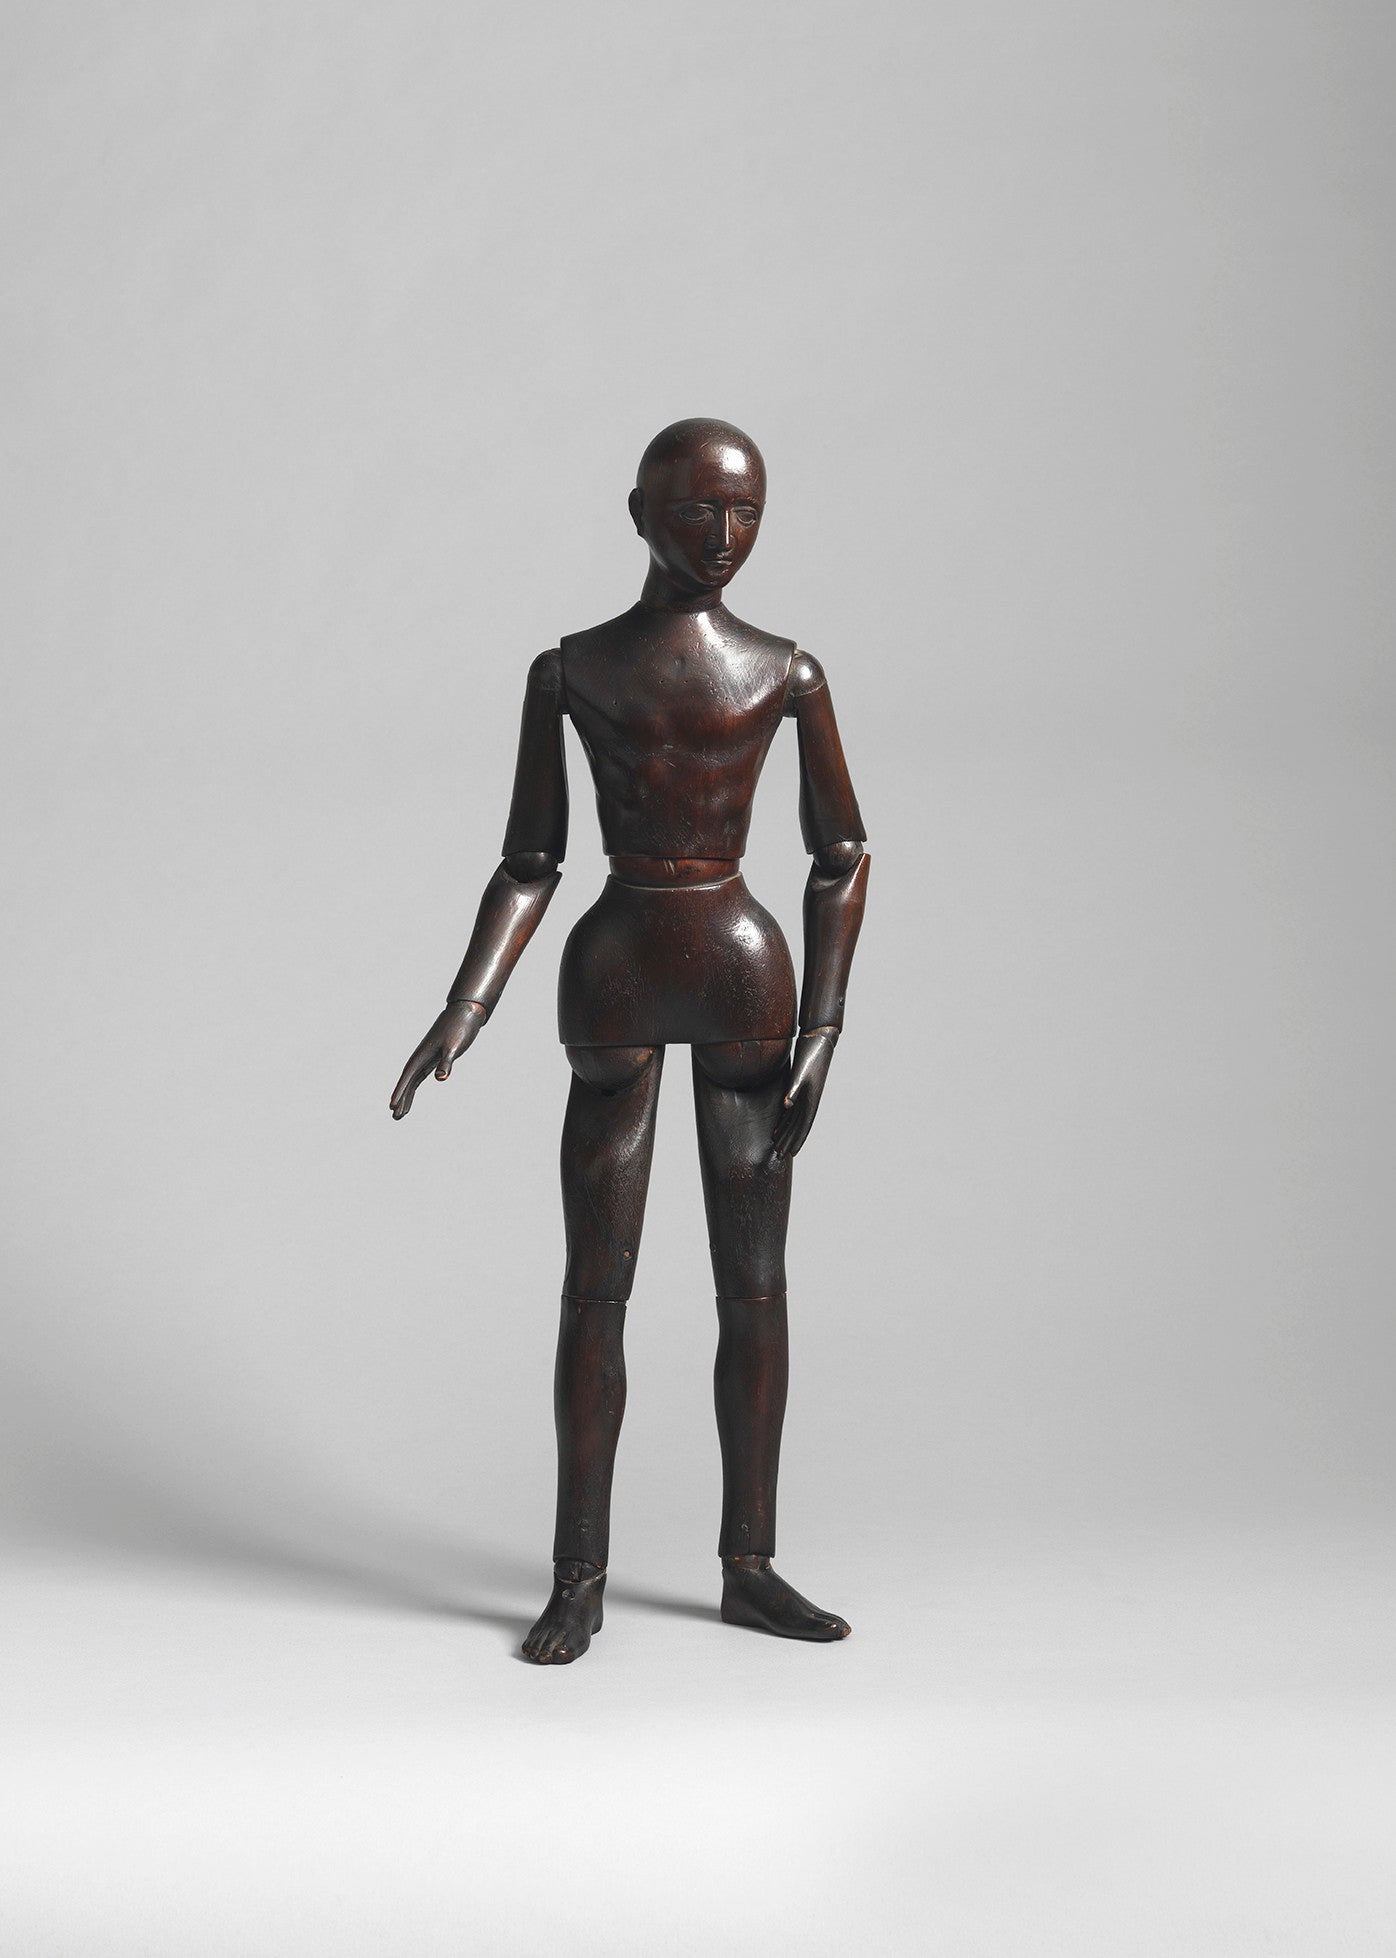 Exceptional Early Artist's Lay Figure or Mannequin